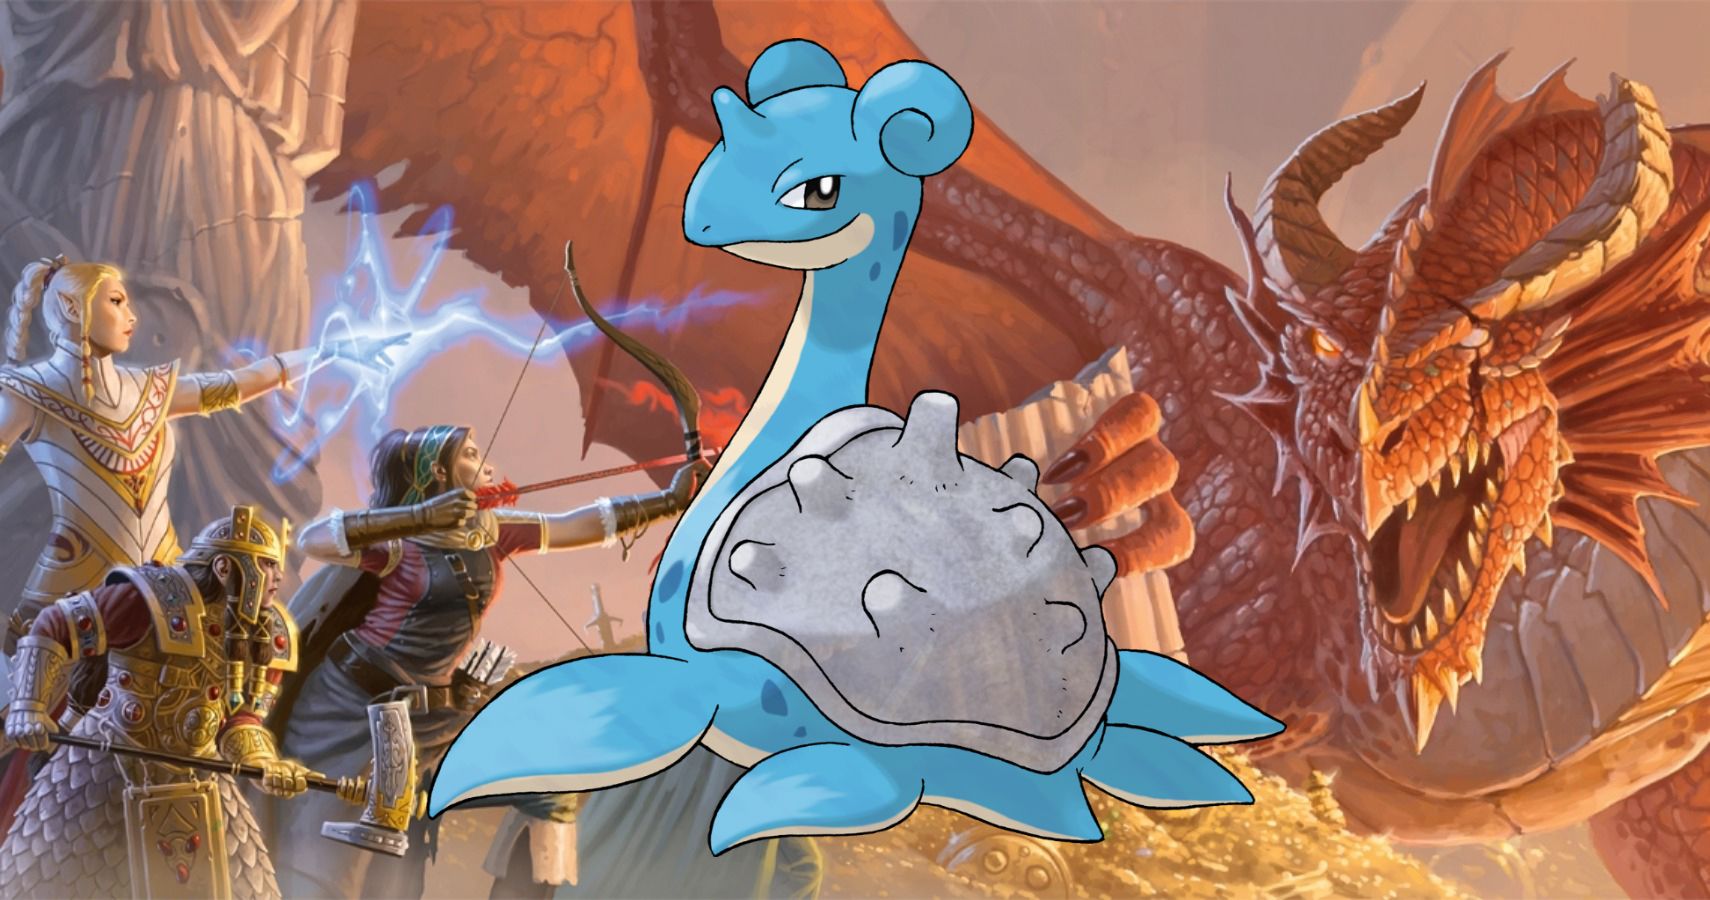 How To Turn Lapras From Pokemon Into A D&D Monster